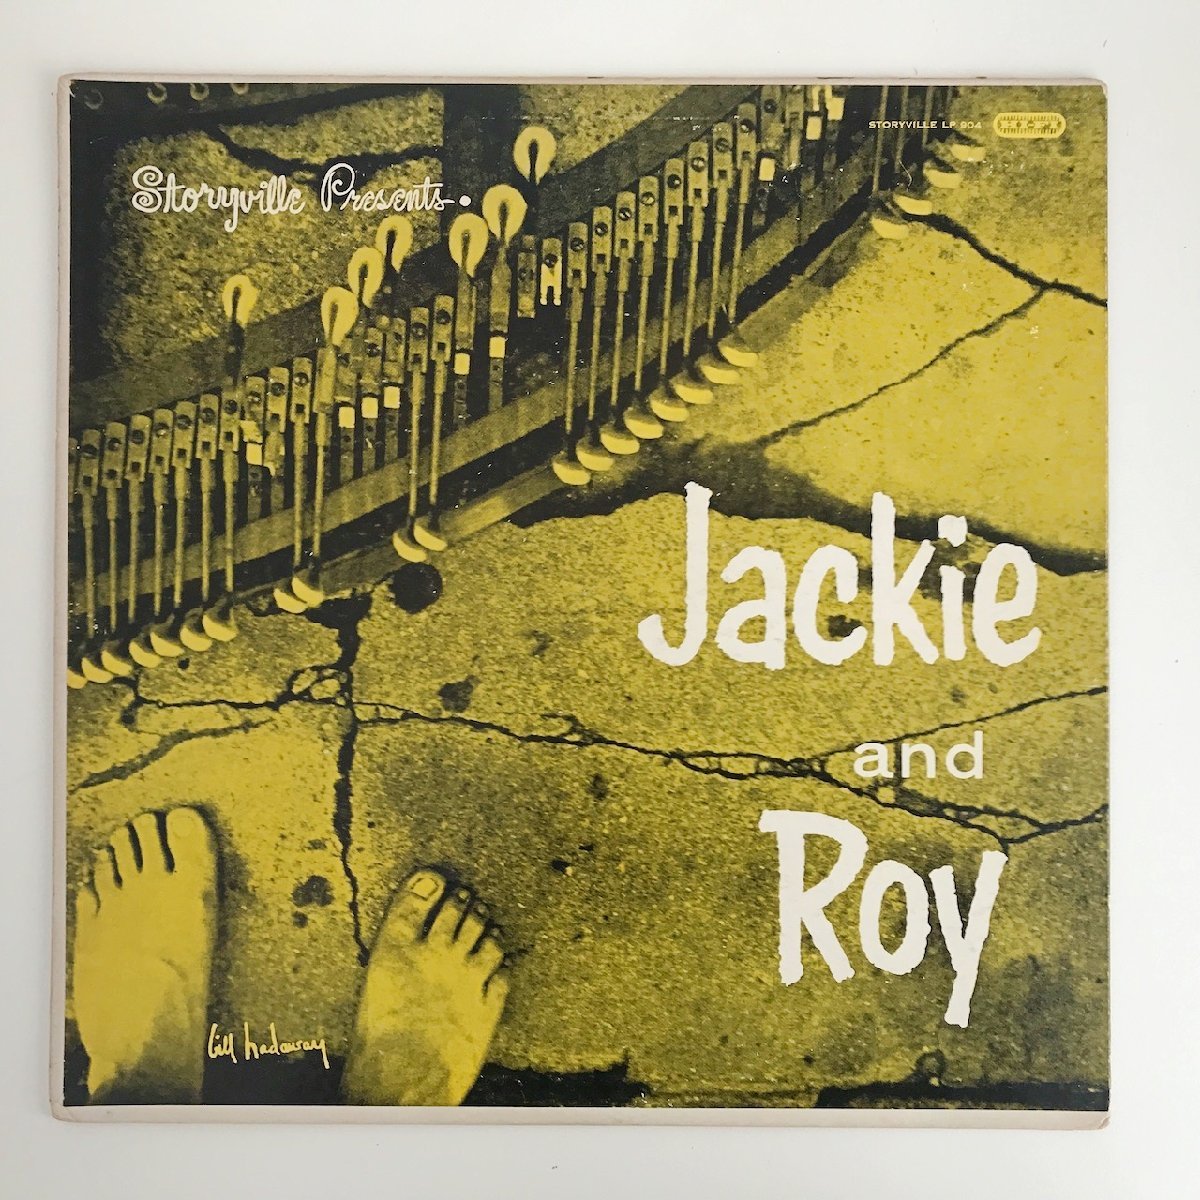 LP/ JACKIE AND ROY / STORYVILLE PRESENTS JACKIE AND ROY / US盤 オリジナル STORYVILLE STLP904 40311-4188の画像1